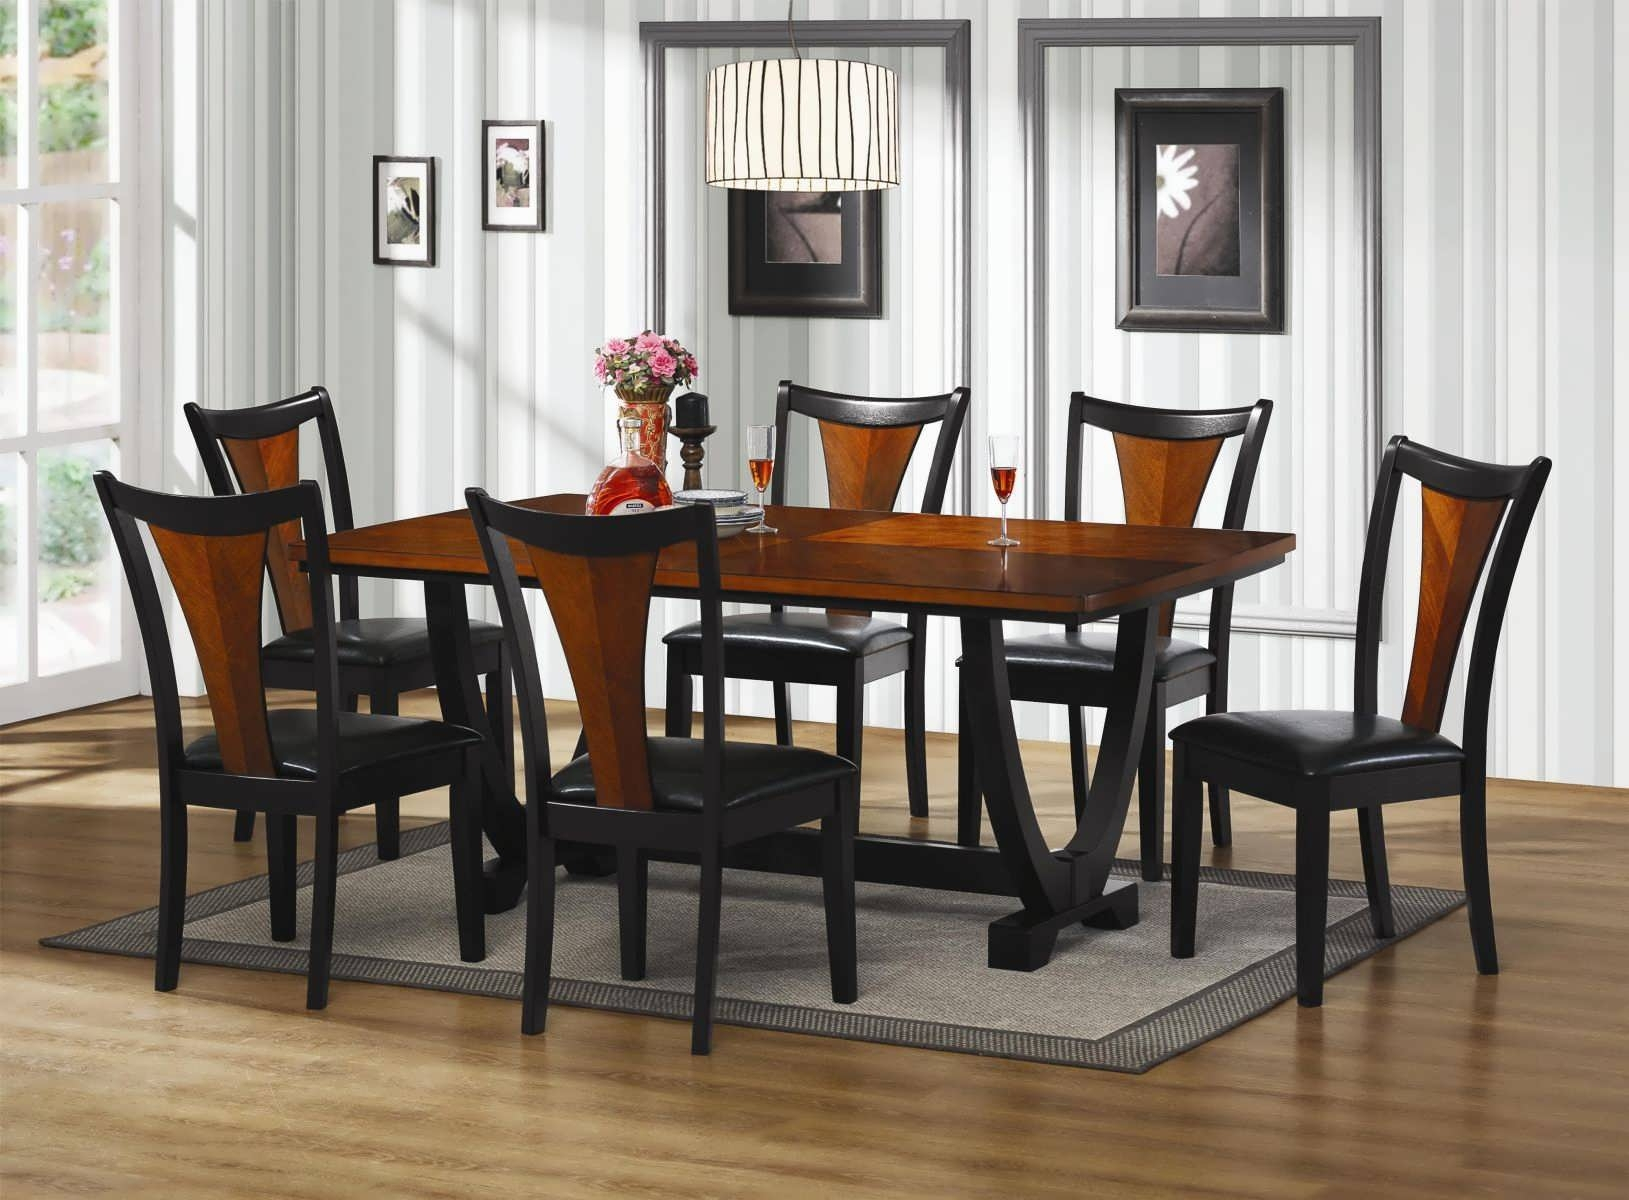 Argos Dining Room Tables And Chairs